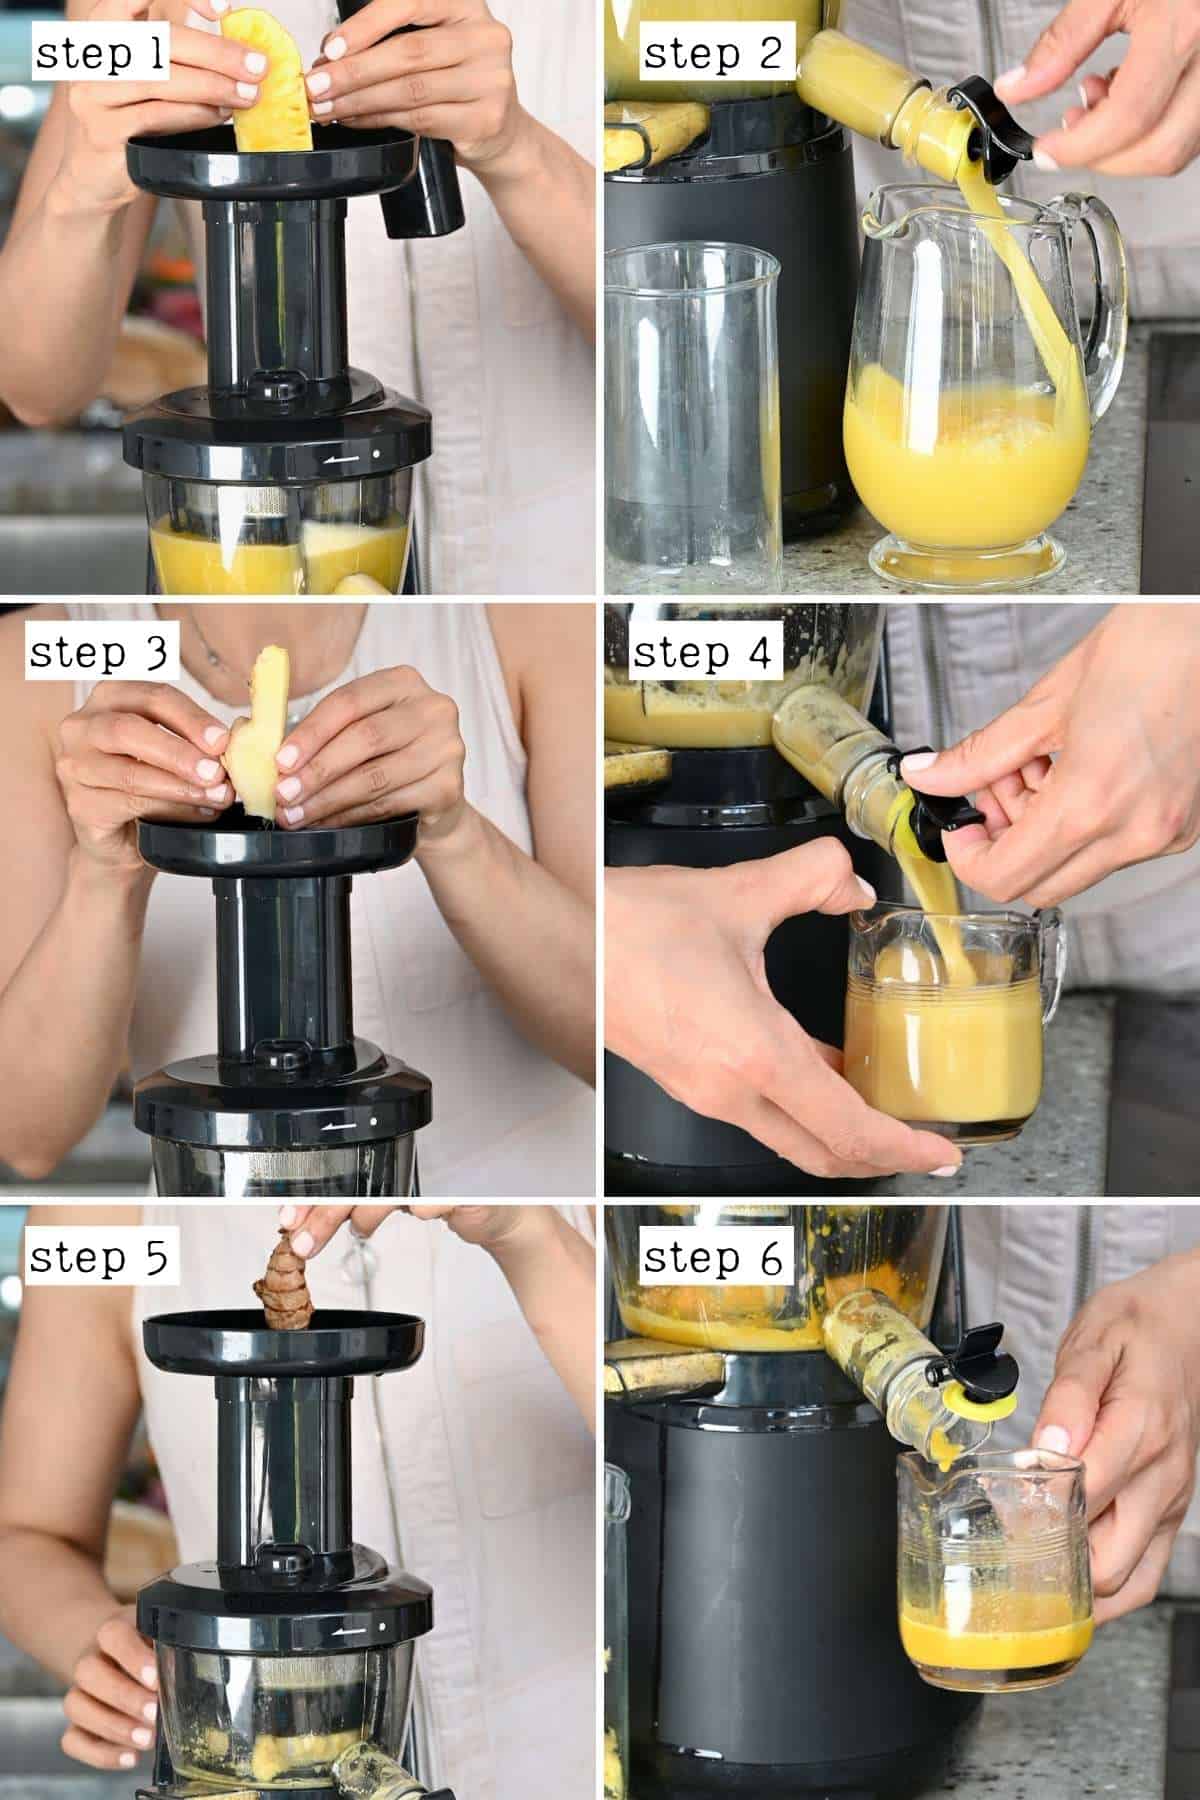 https://www.alphafoodie.com/wp-content/uploads/2021/07/Pineapple-Ginger-Juice-Steps-for-juicing-pineapple-ginger-and-turmeric.jpg